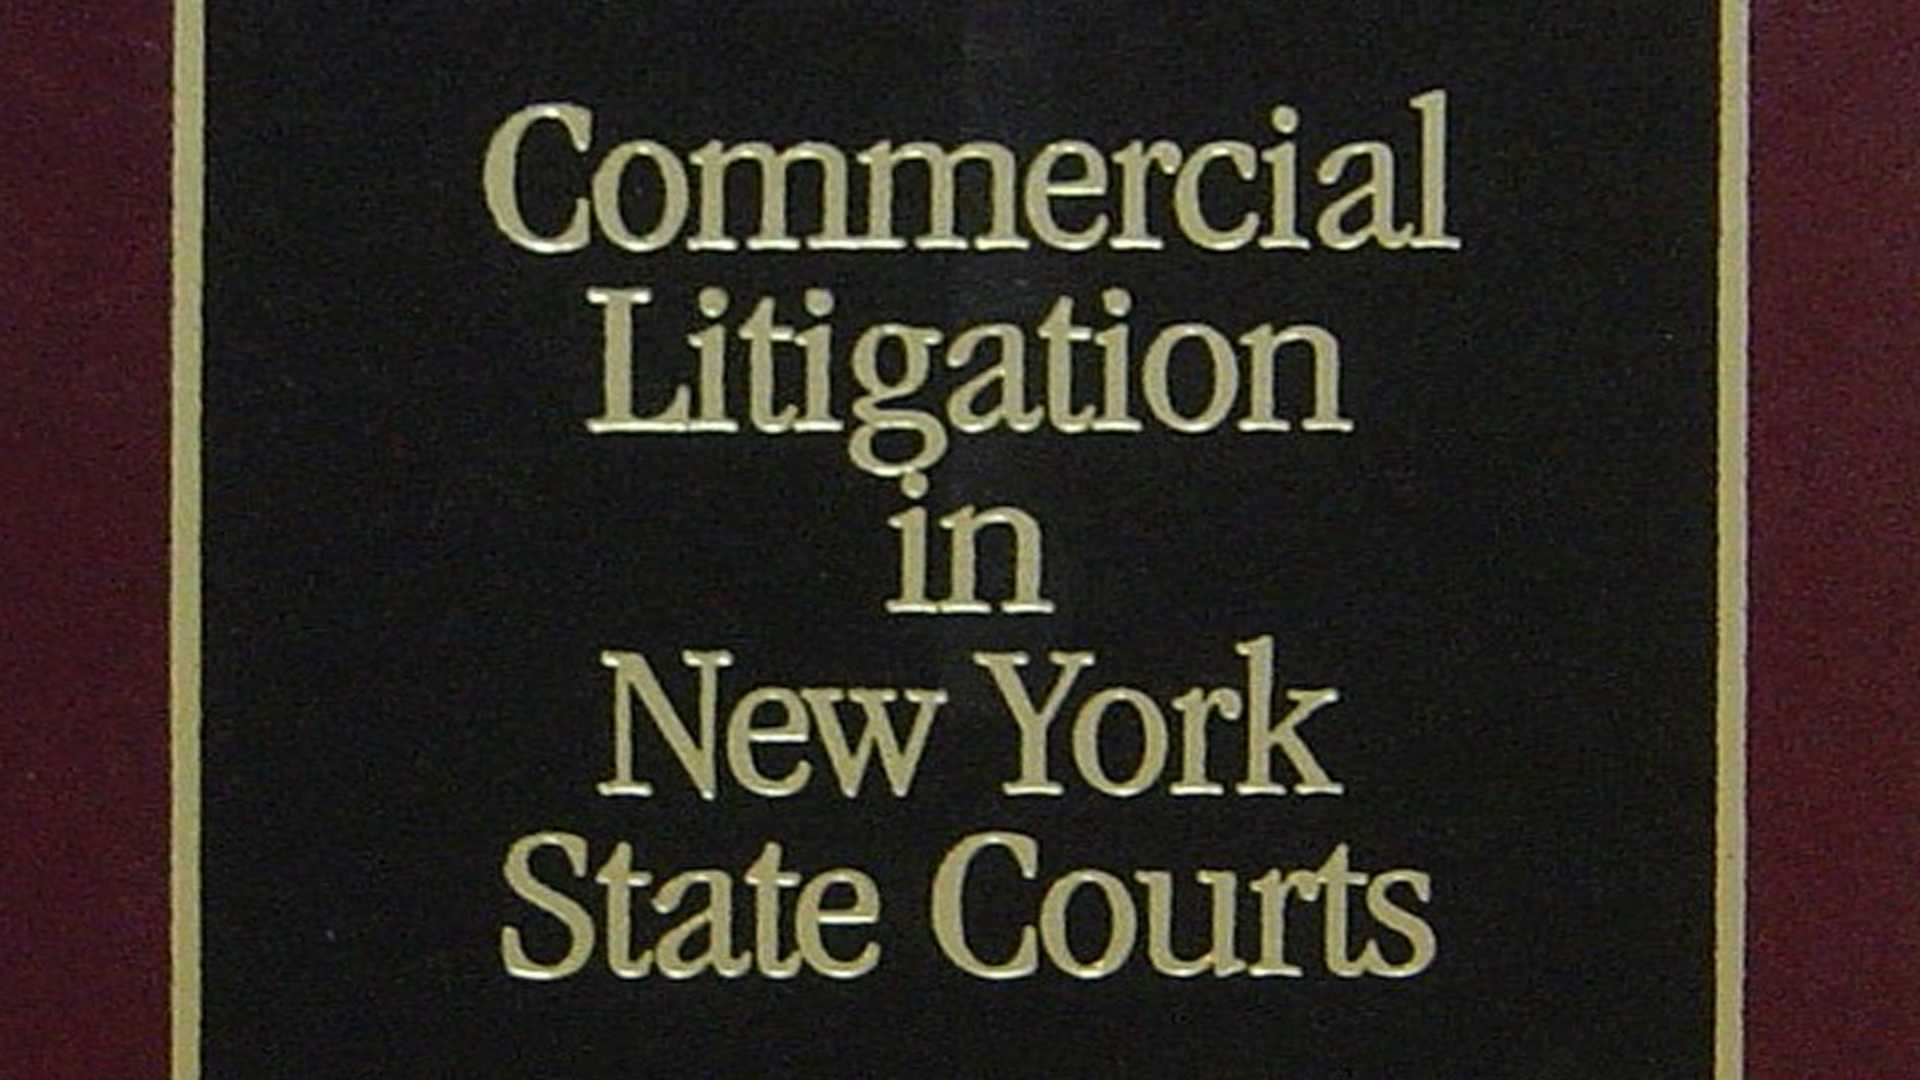 Commercial Litigation in New York State Courts, 3rd Edition